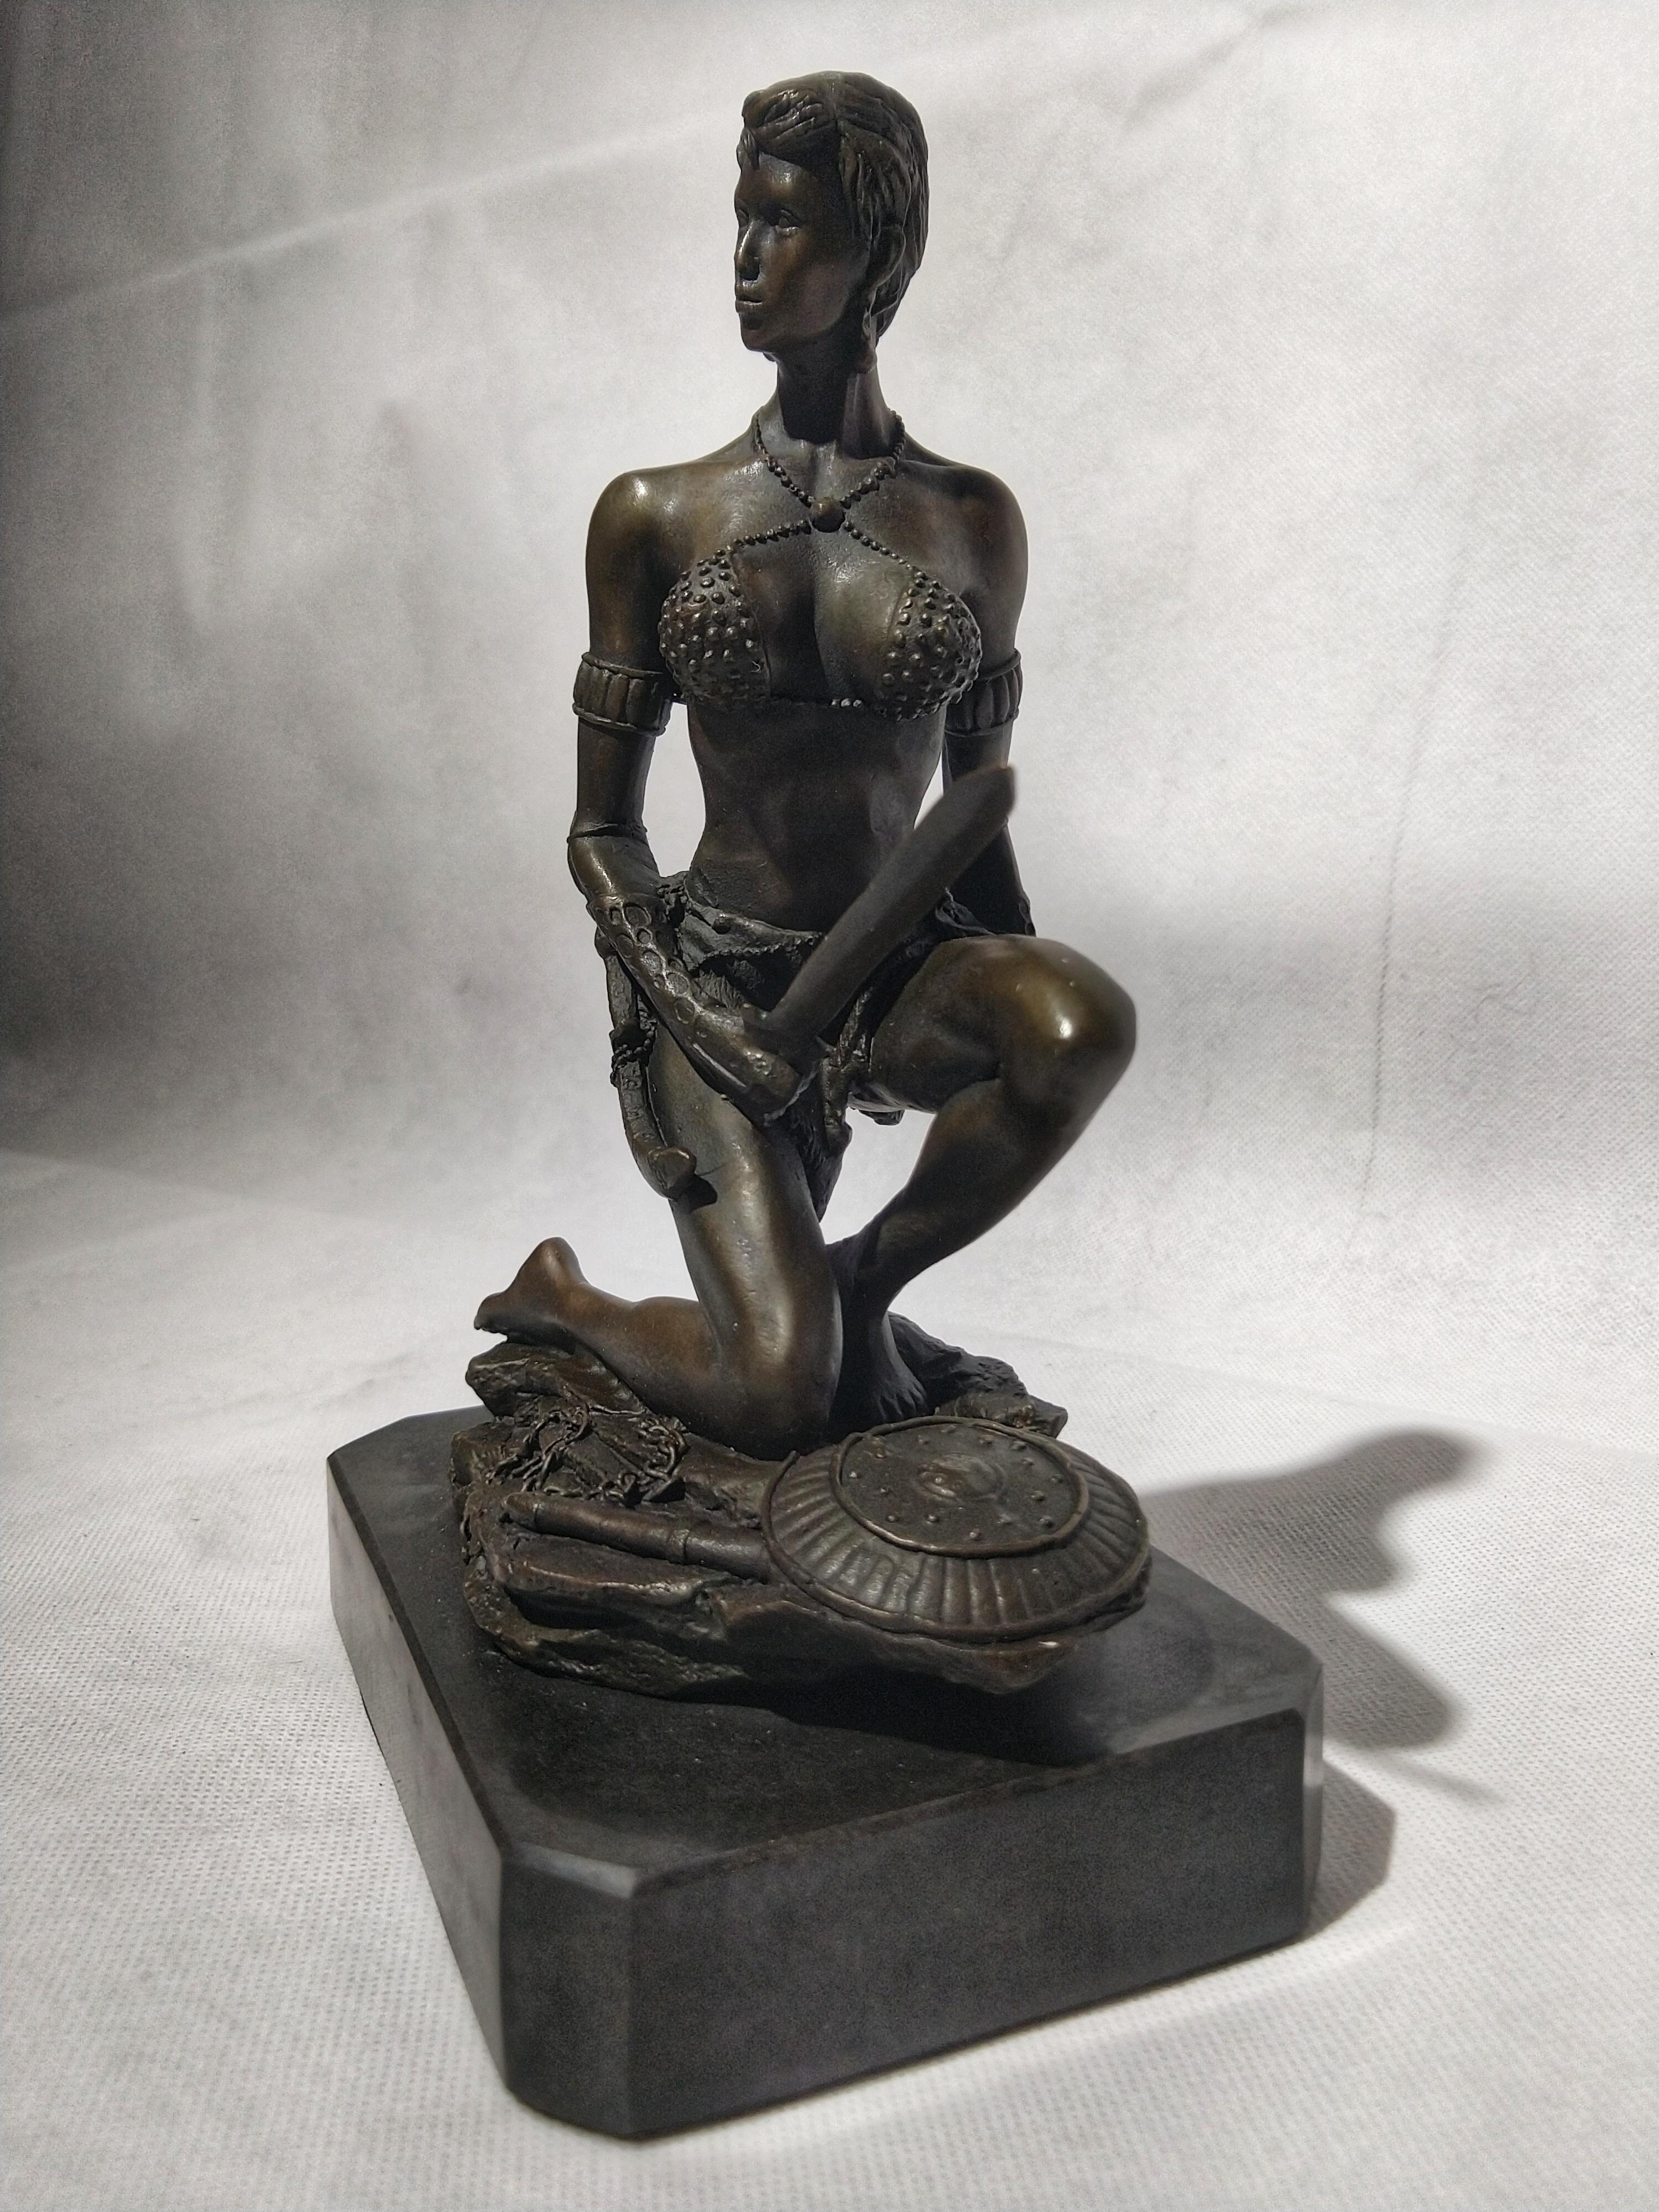 Beautiful Art Deco style sculpture depicting an Amazon warrior kneeling holding her sword, at her feet a chain and a shield. Signed Fisher.

Made using hot cast and the lost wax method: plum bronze, the purest form of bronze. This method was